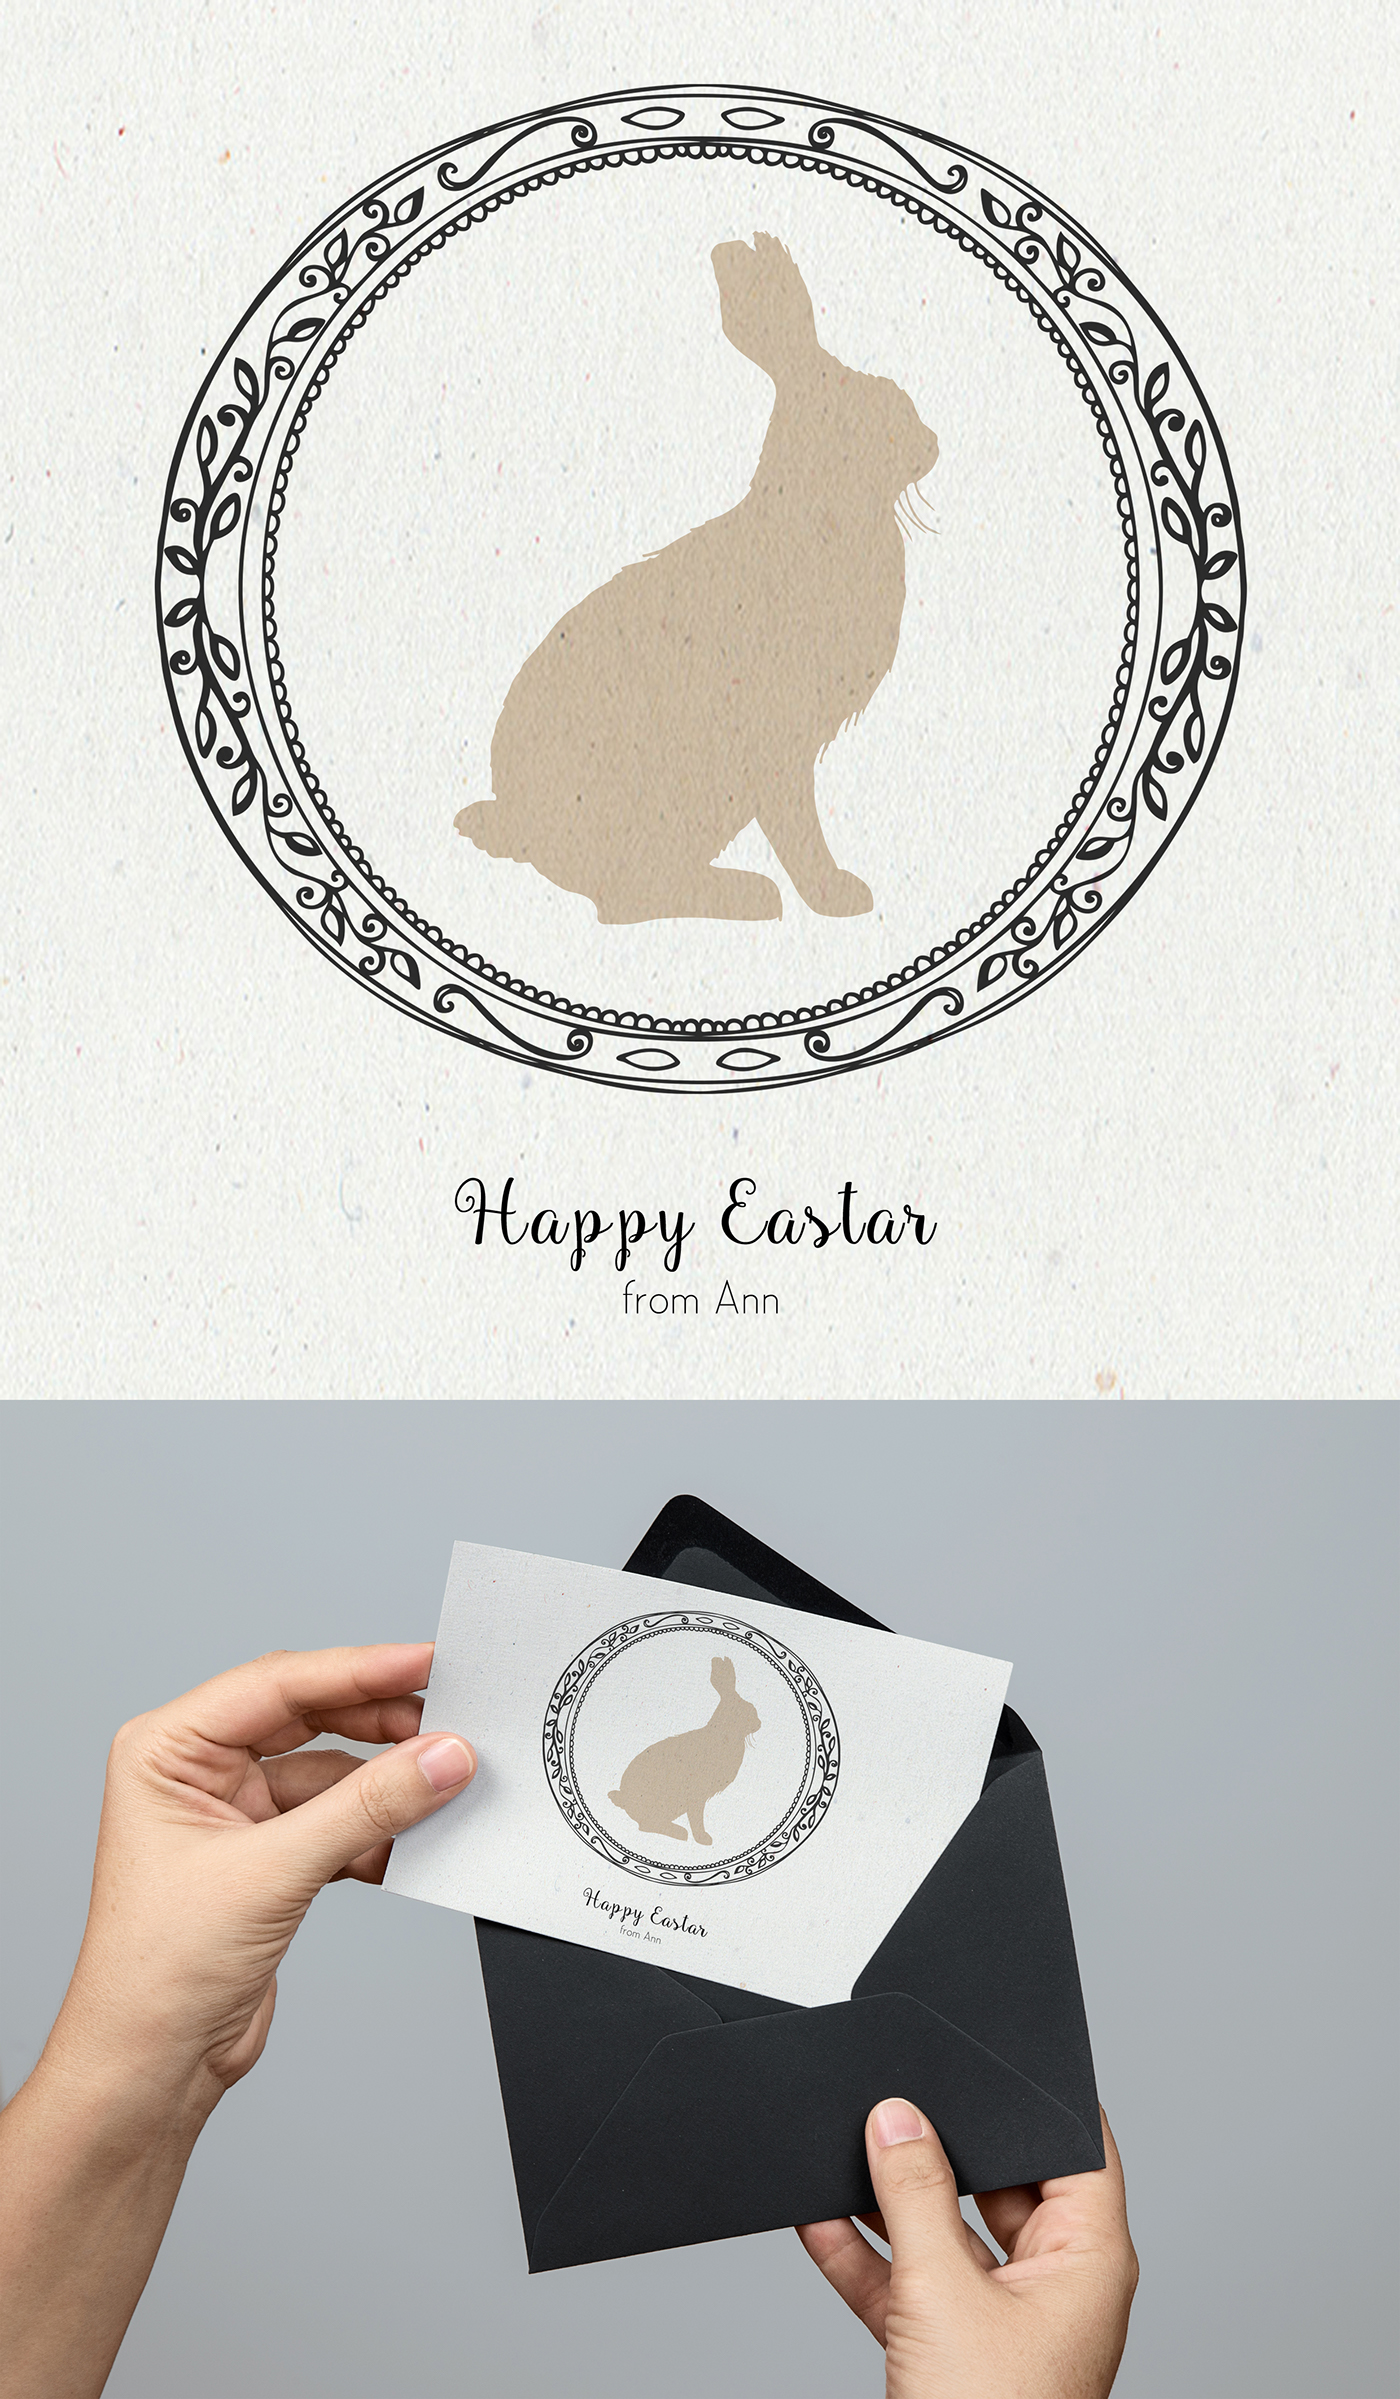 bunny easter postcard card wishes Easter bunny freebies Photoshop Fun quick bunny minimal card postcard wishes easter bunny